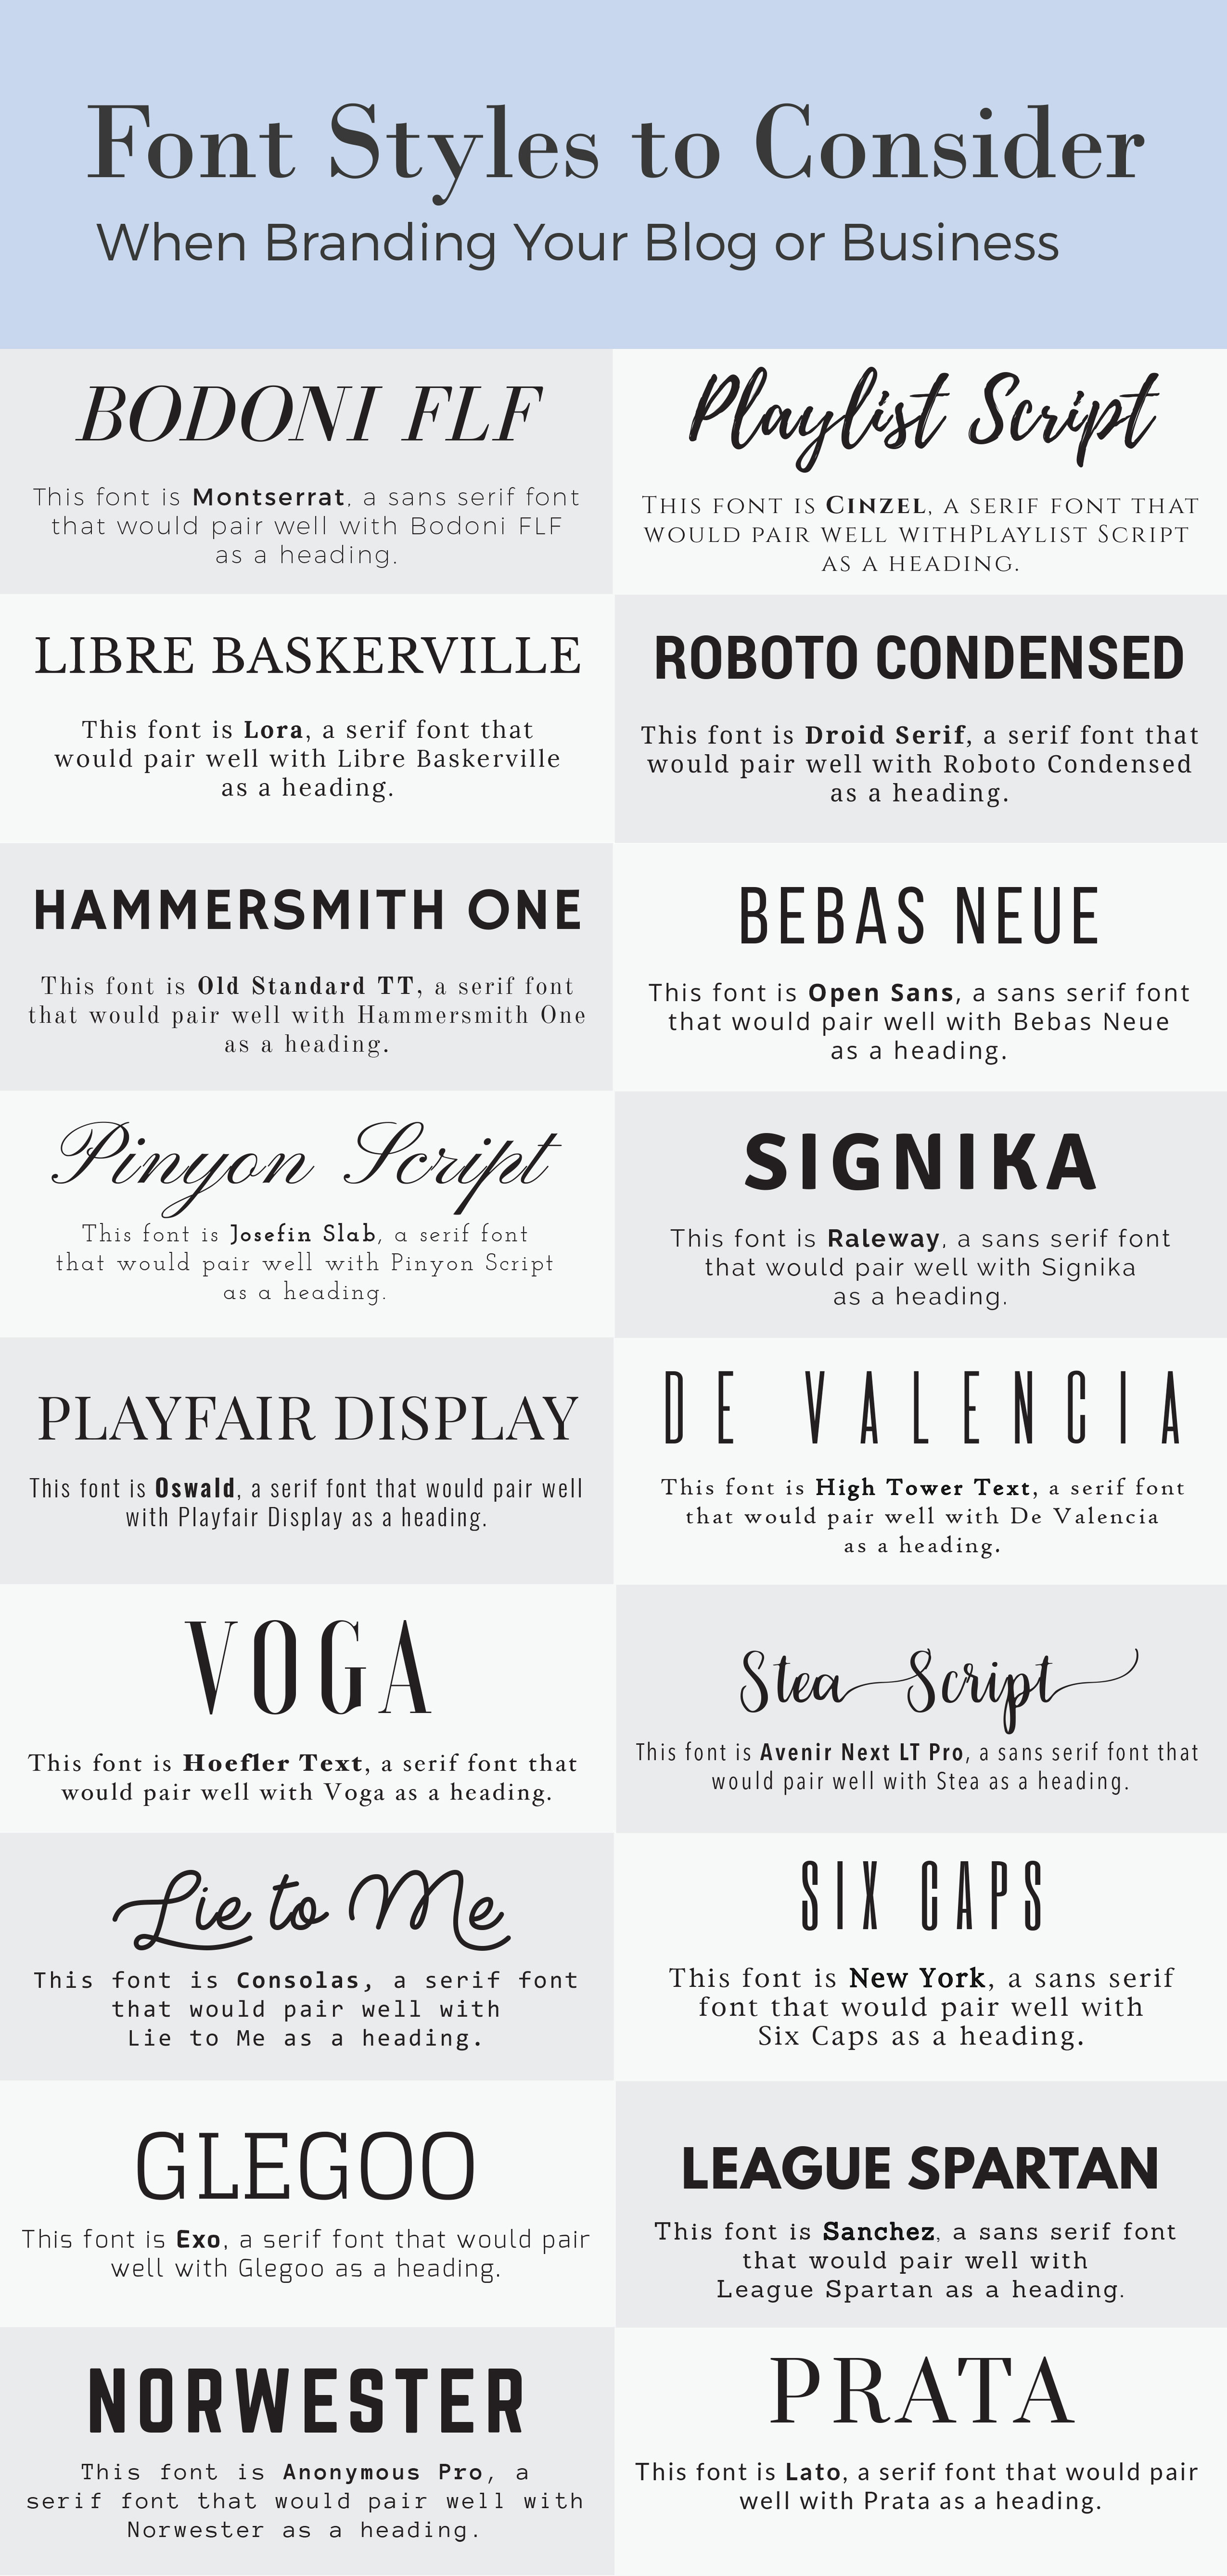 36 Font Styles To Consider When Branding Your Business Or Blog